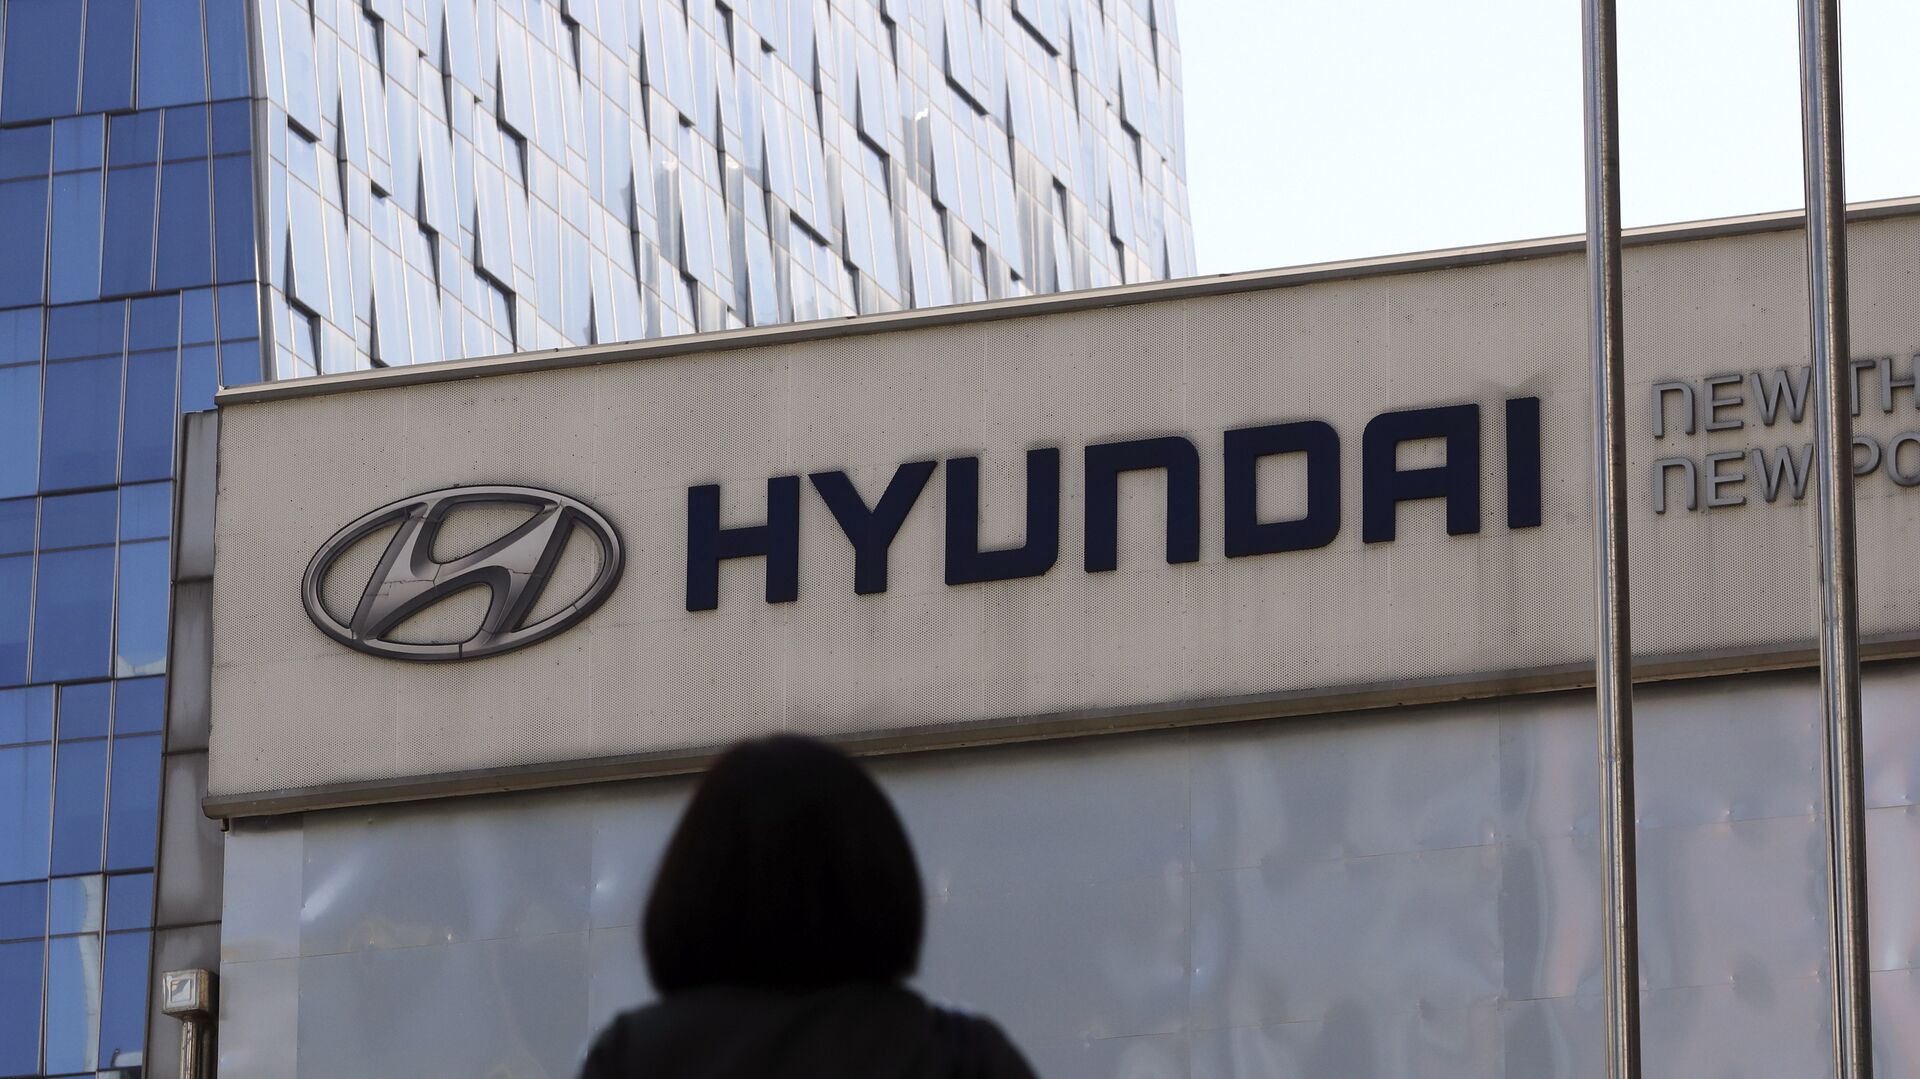 The logo of Hyundai Motor Co. is displayed at the automaker's showroom in Seoul, South Korea, Wednesday, April 26, 2017 - Sputnik International, 1920, 08.02.2021